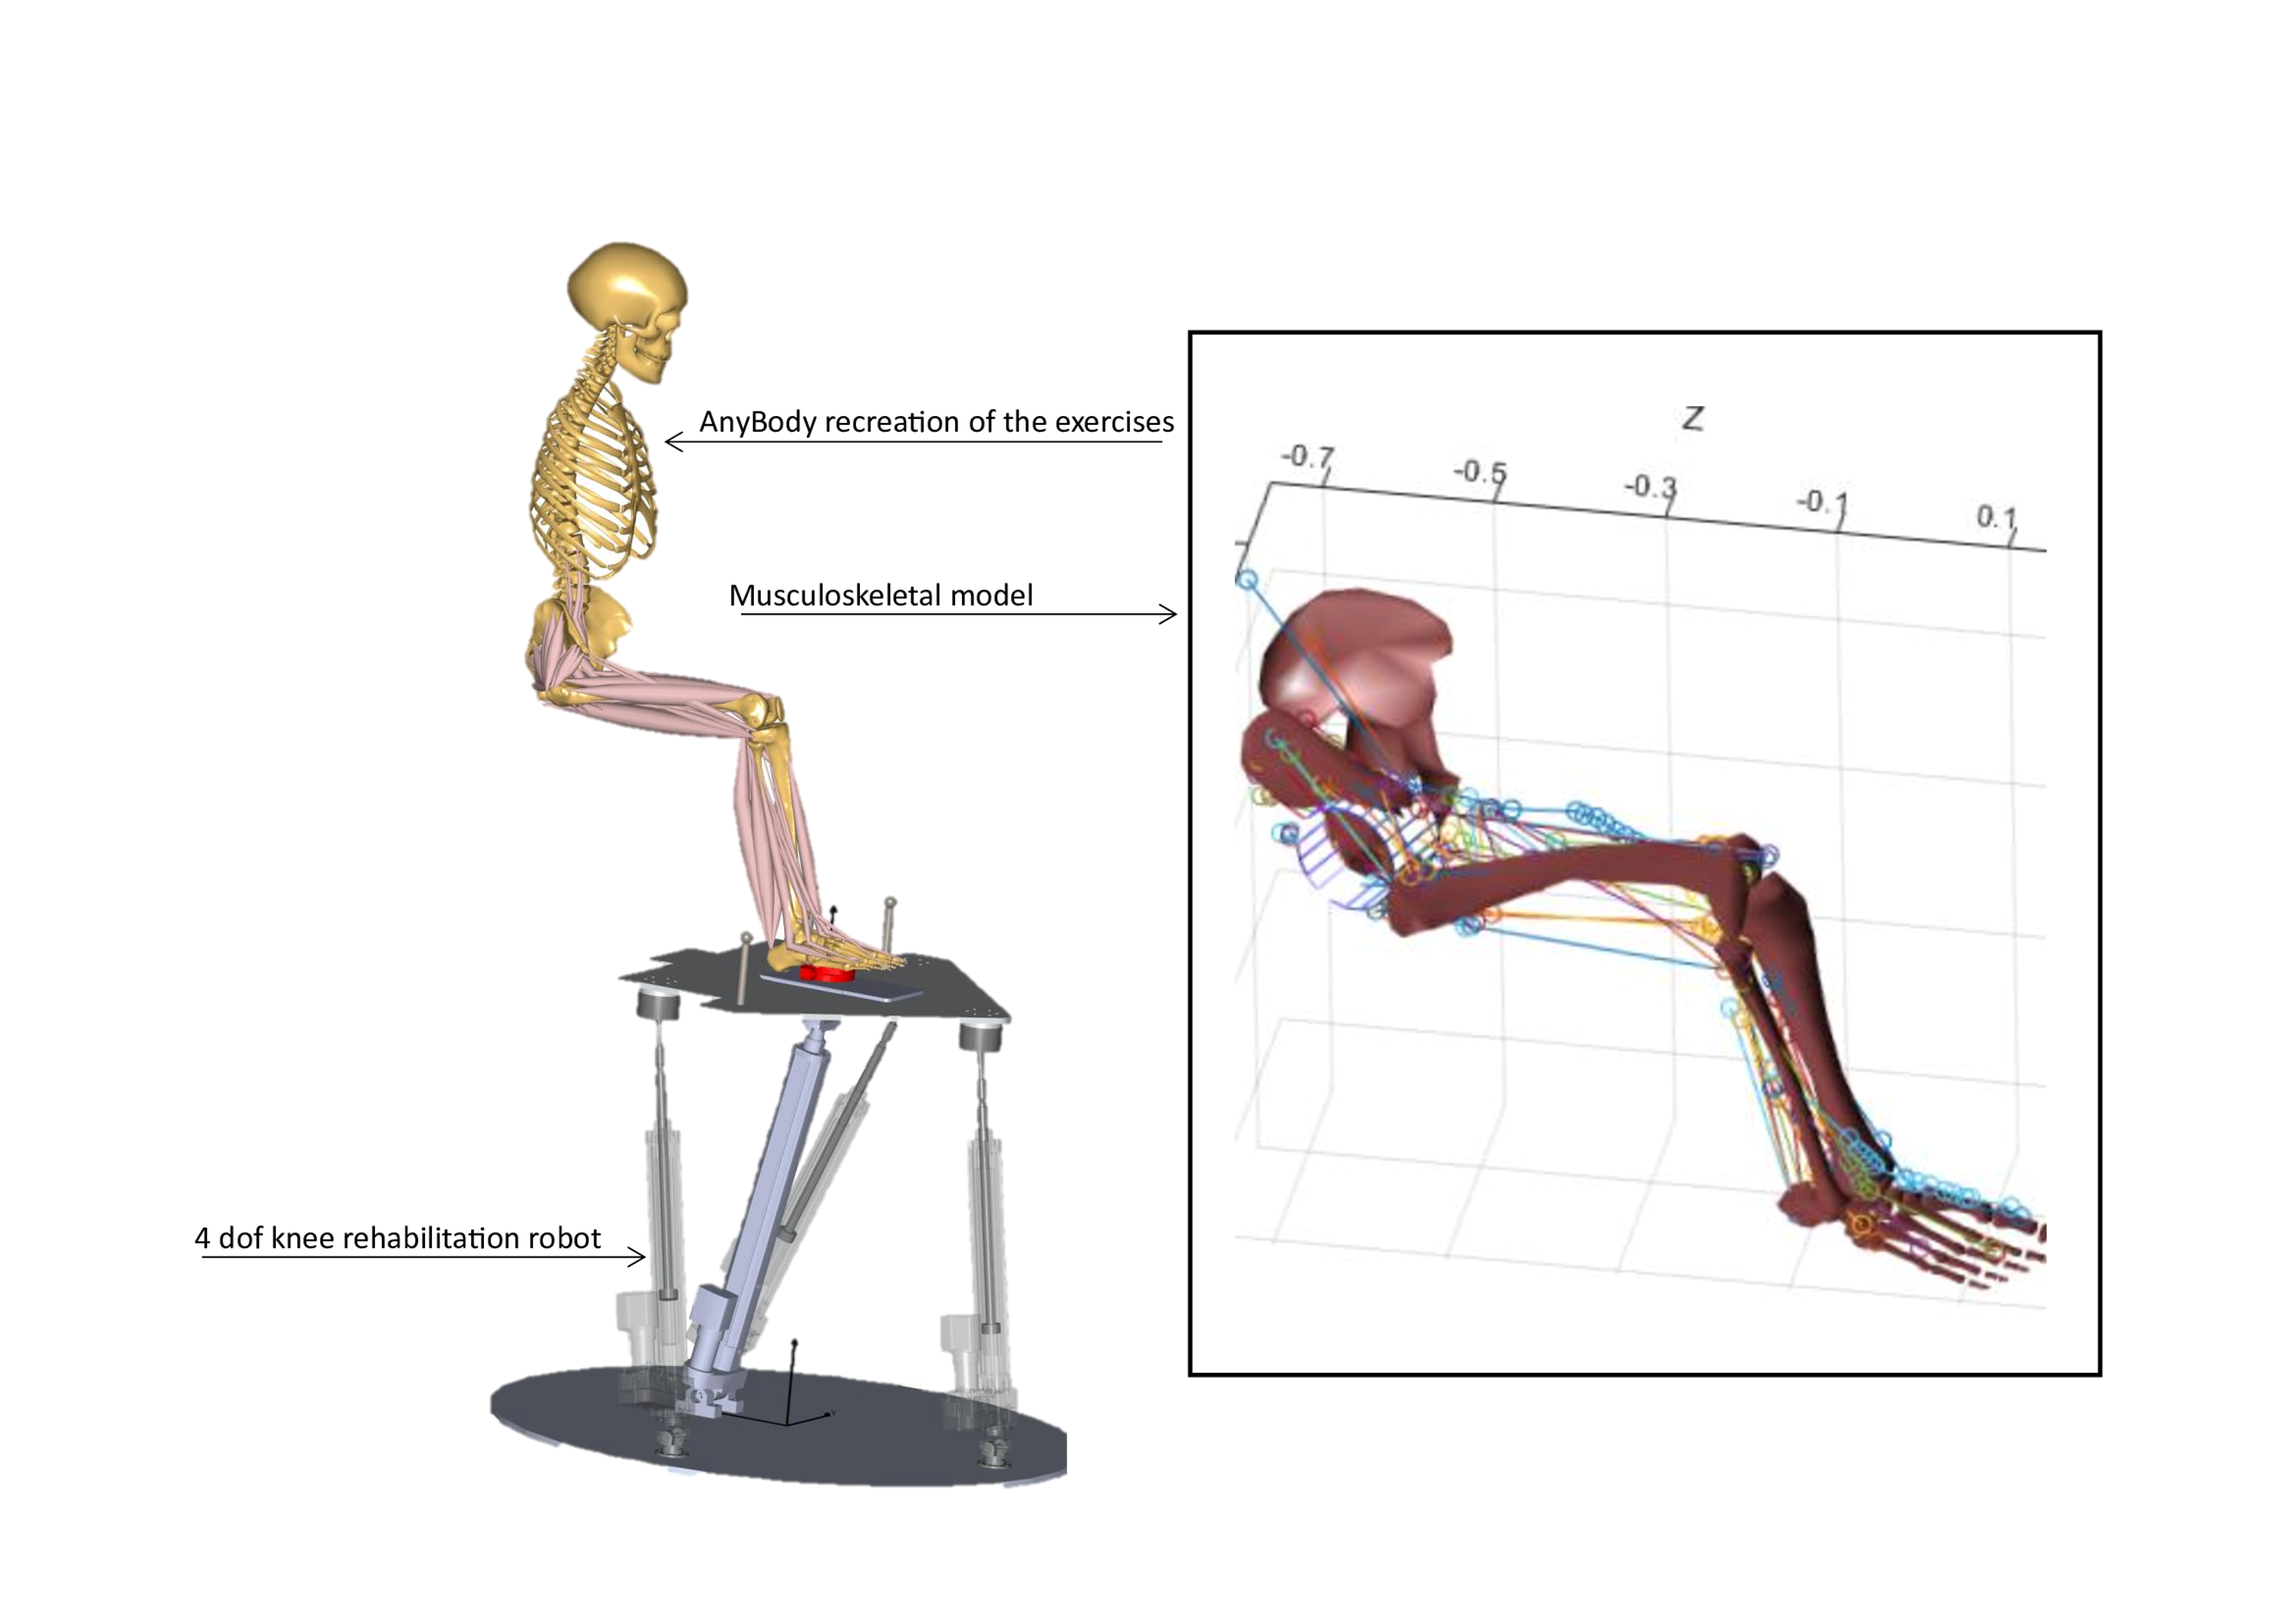 Validation of a real-time musculoskeletal model with AnyBody - Resolution of the inverse dynamics of musculoskeletal model of the lower limb validated with AnyBody.